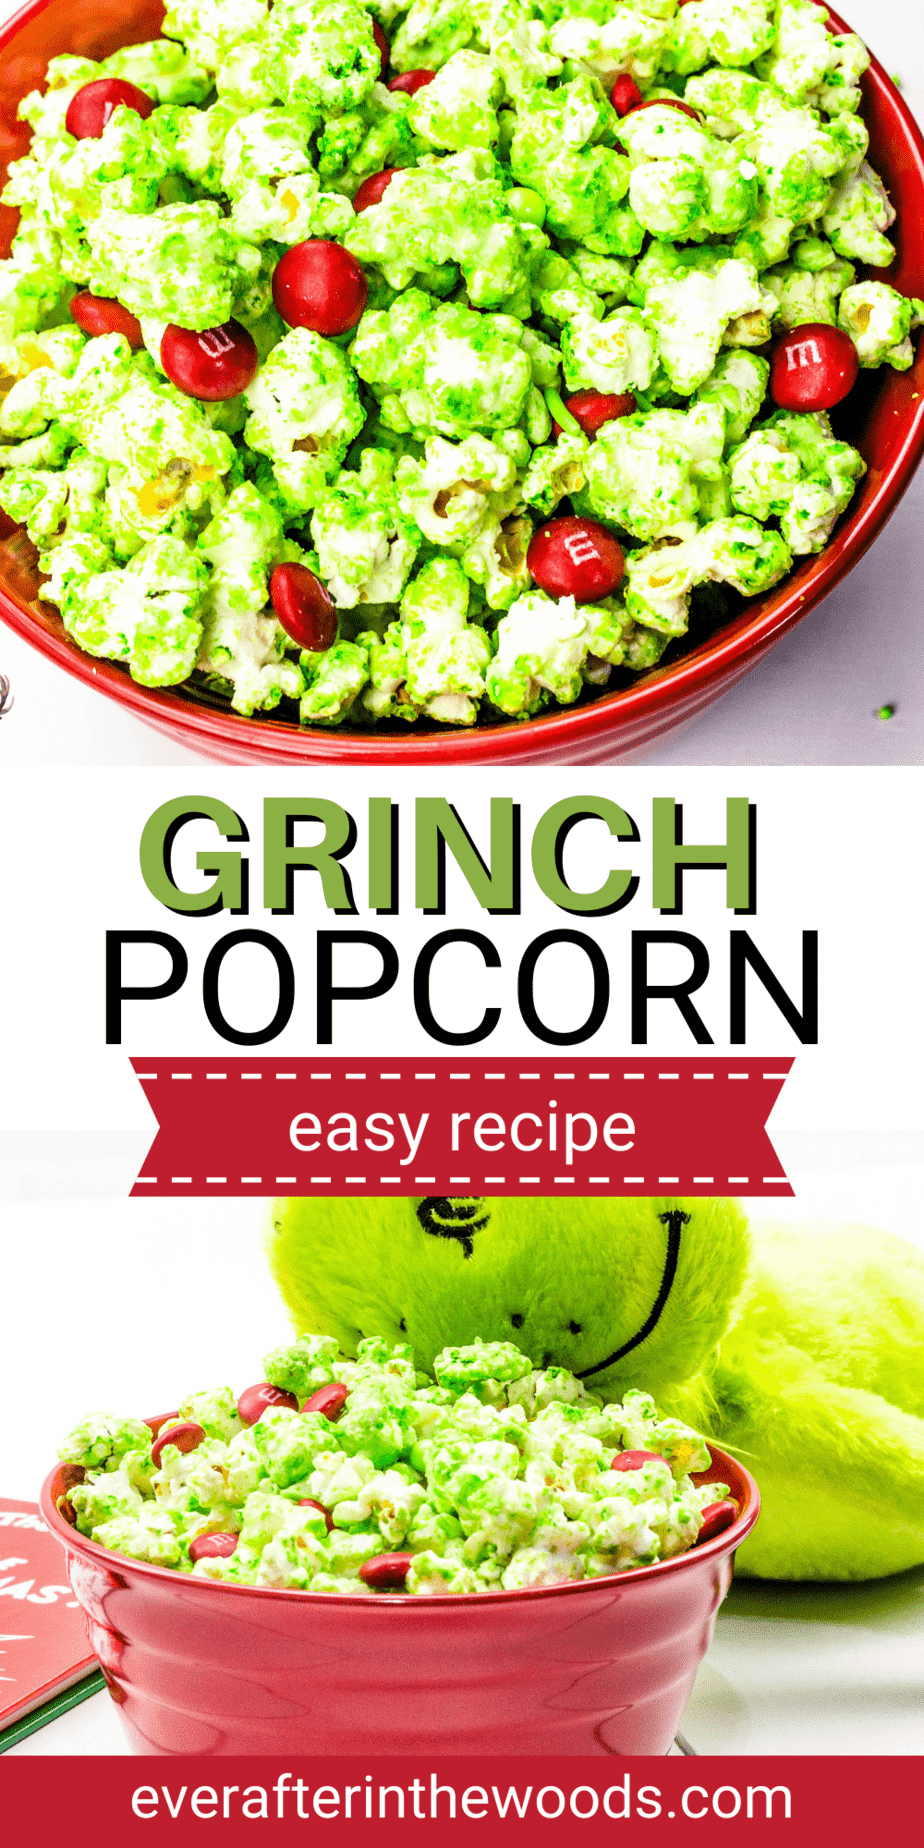 Grinch Popcorn for Christmas